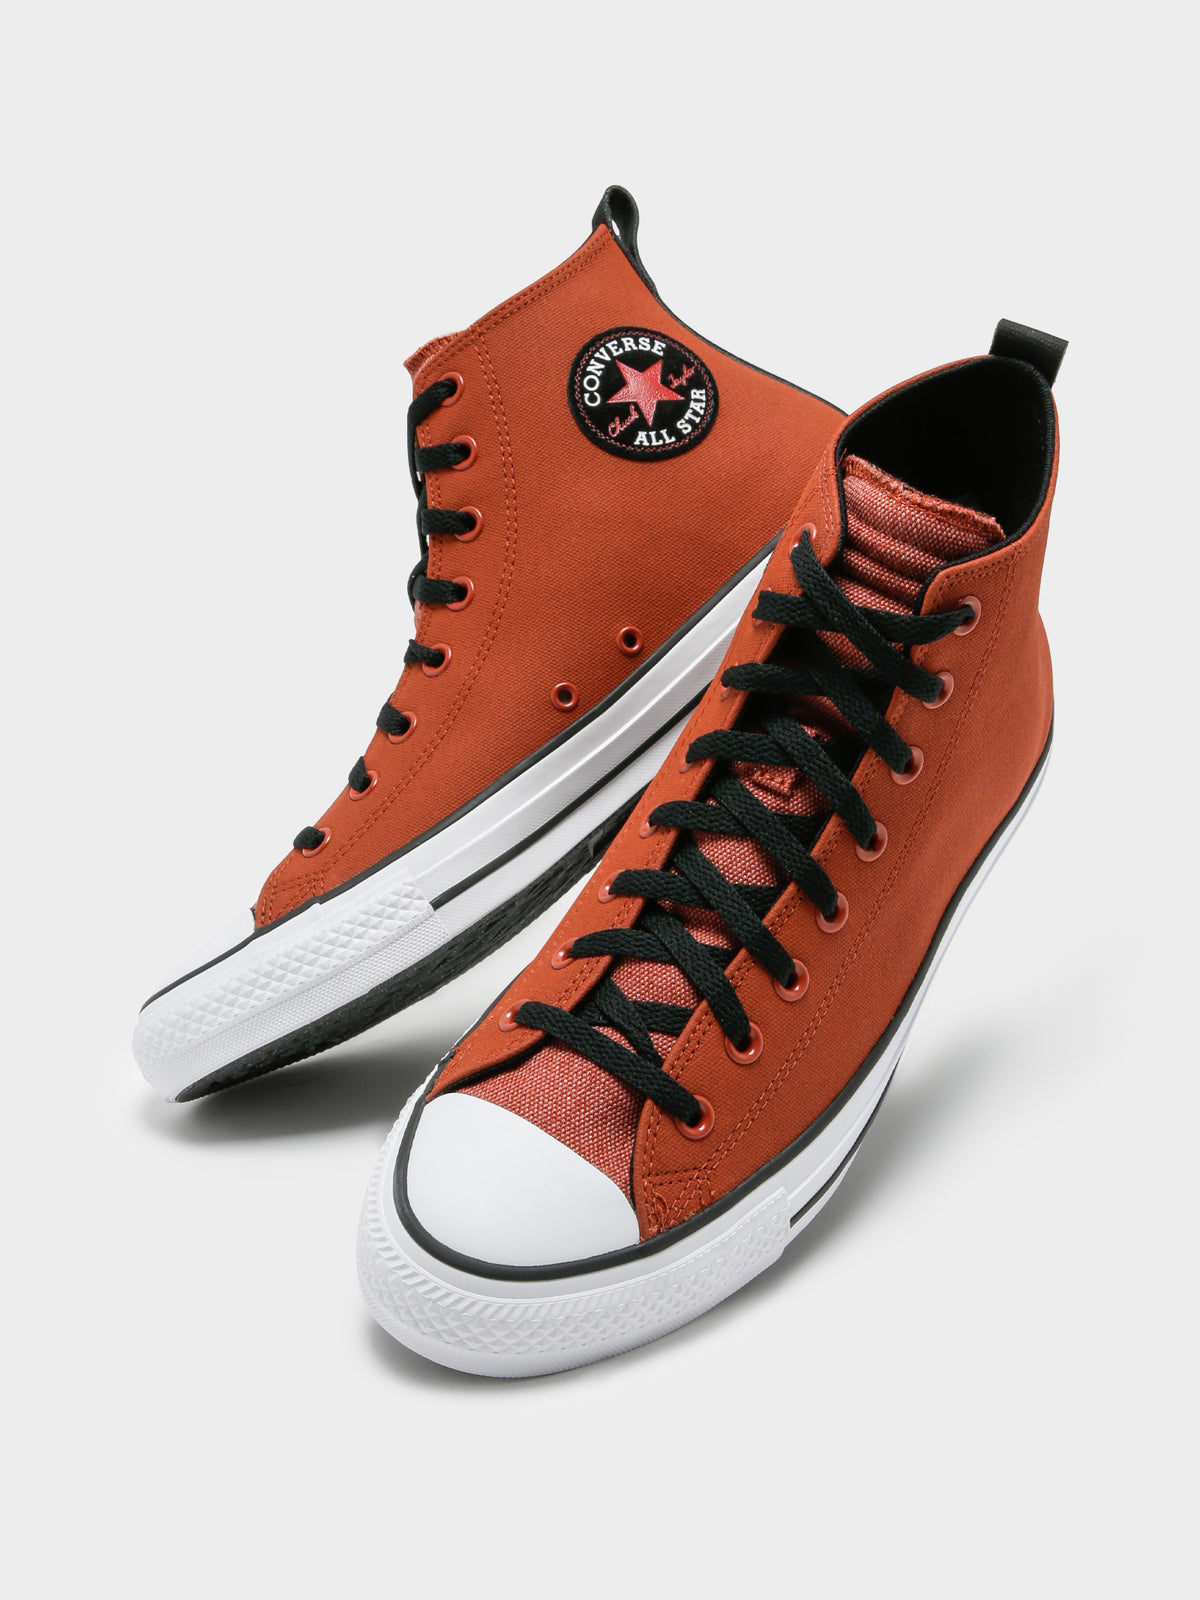 Unisex Chuck Taylor All Star High Top in Brown &amp; Black